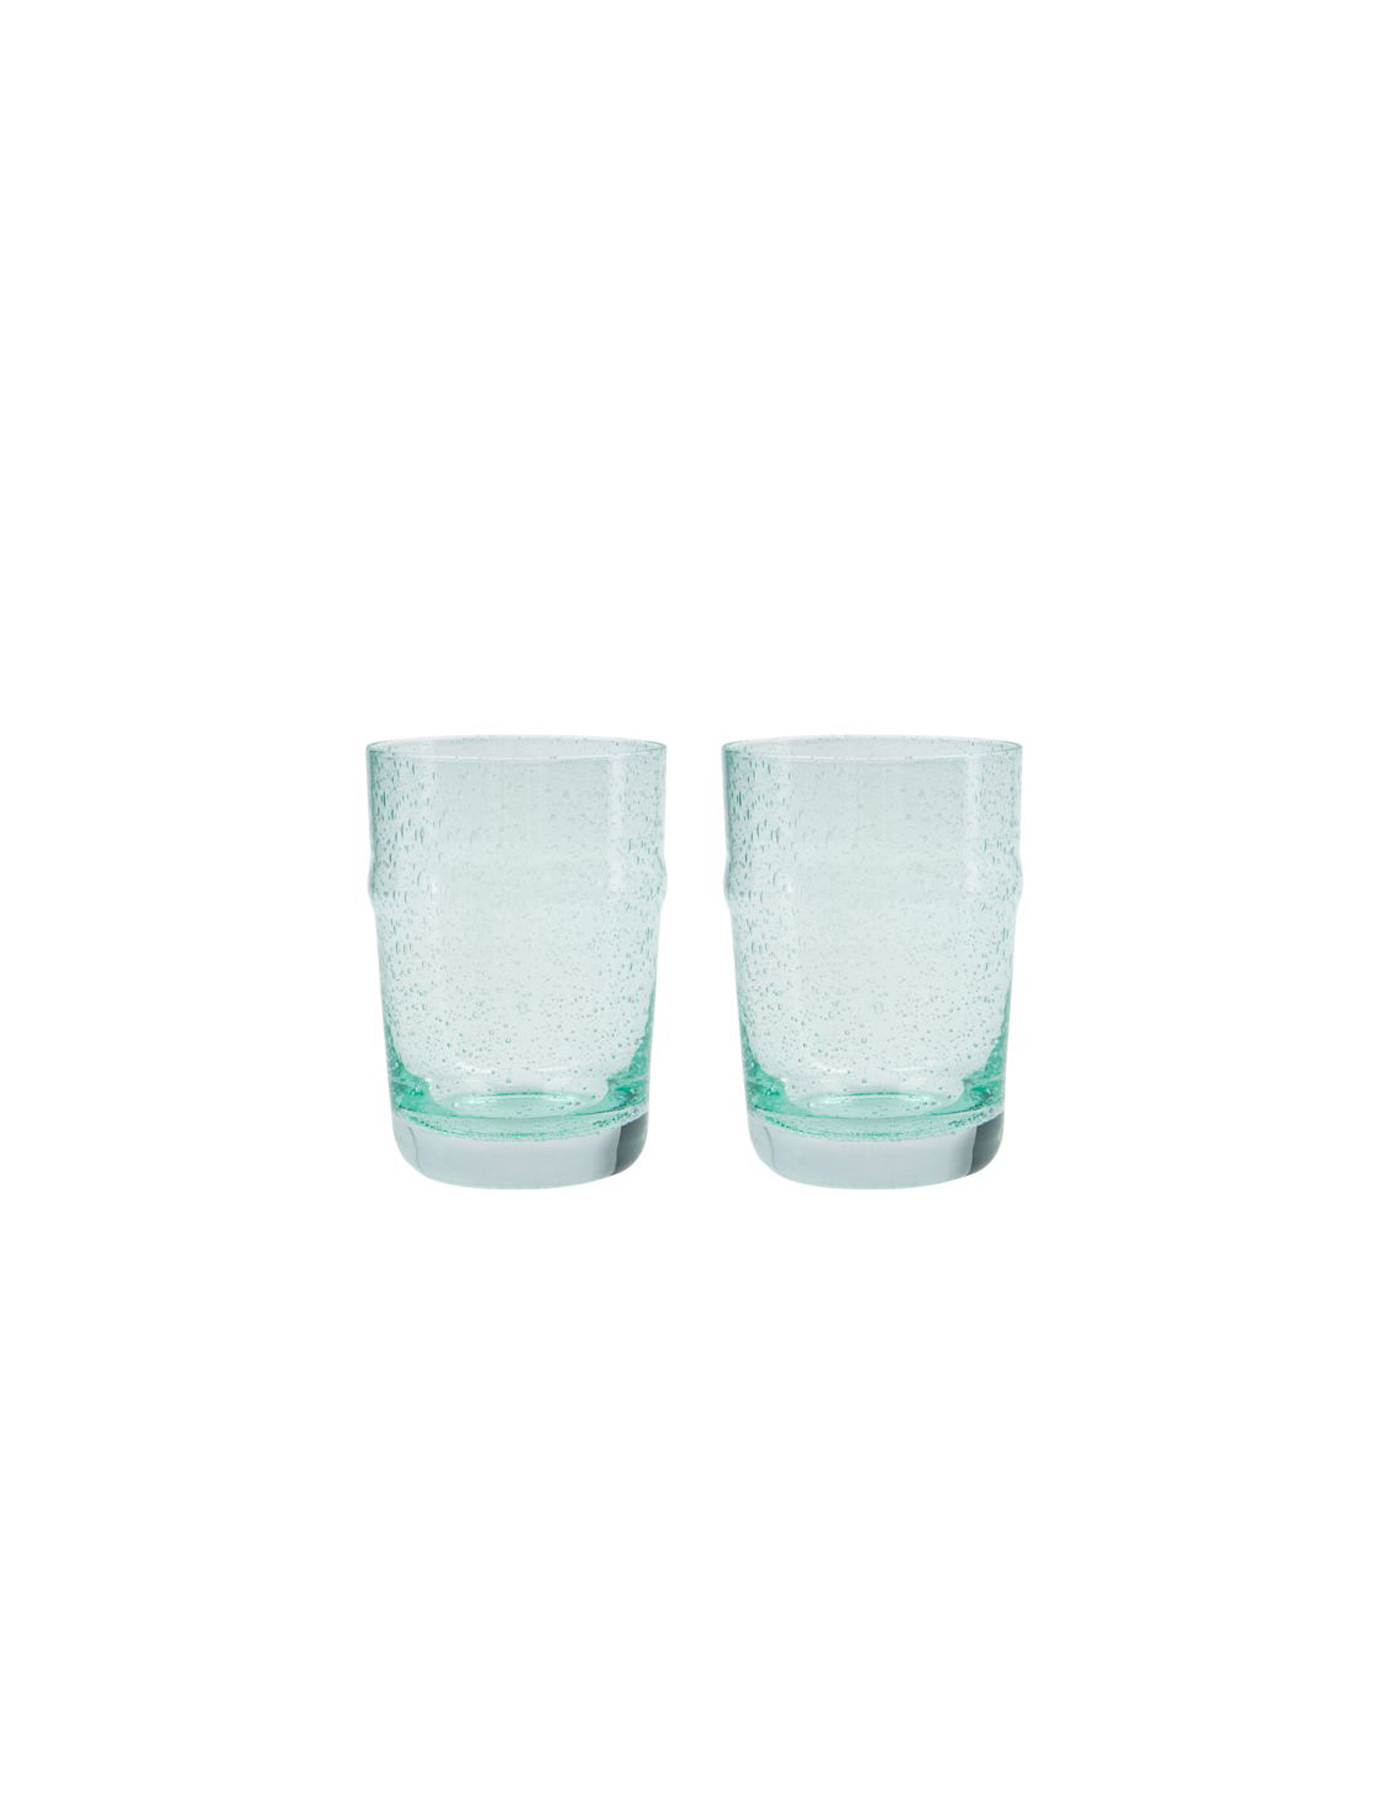 House Doctor Aqua Tumbler Recycled Glass Set, House Doctor